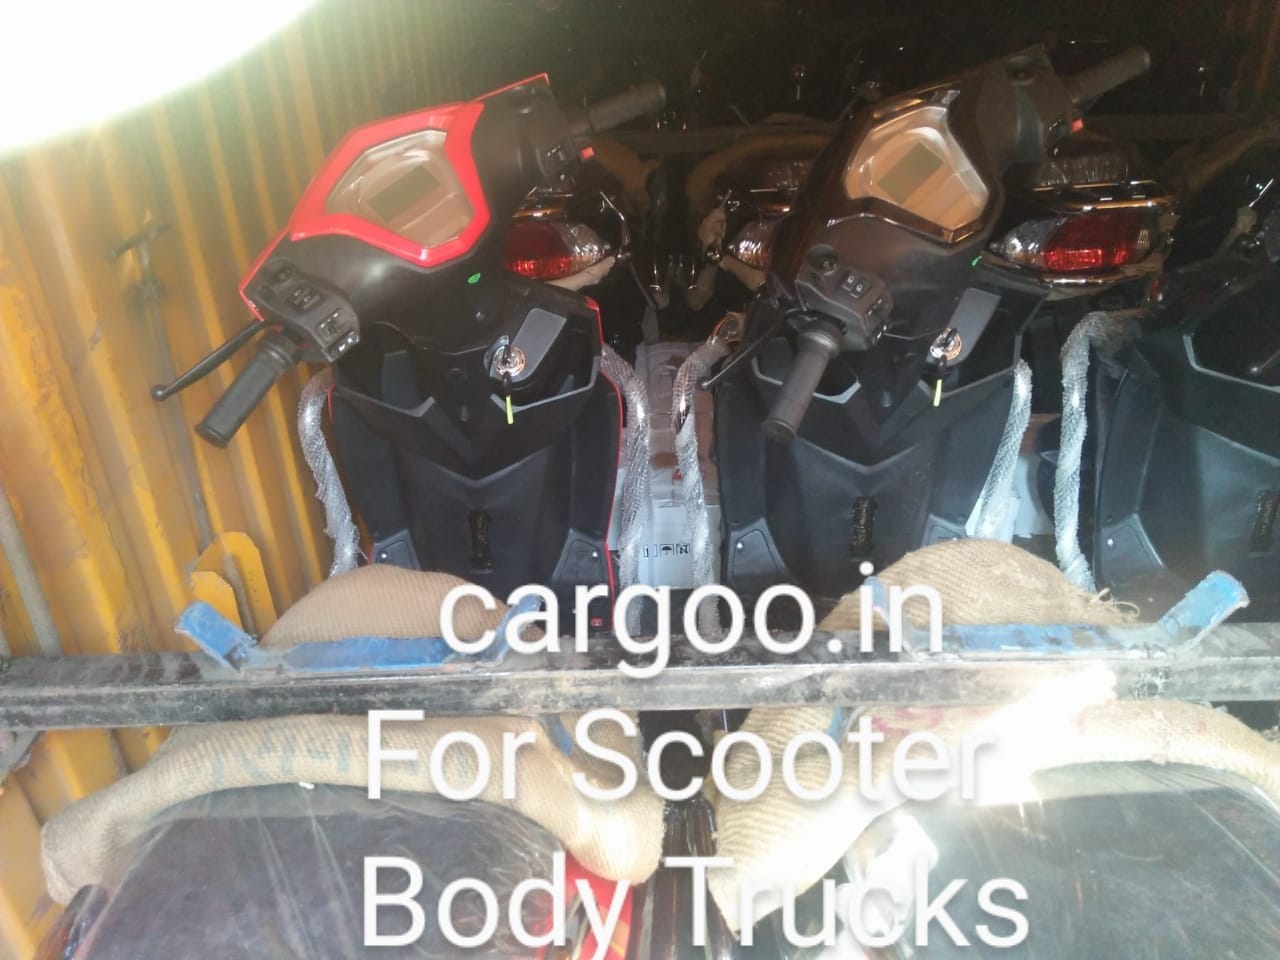 Two wheeler Vehicle Transportation Services with scooter body auto body trucks